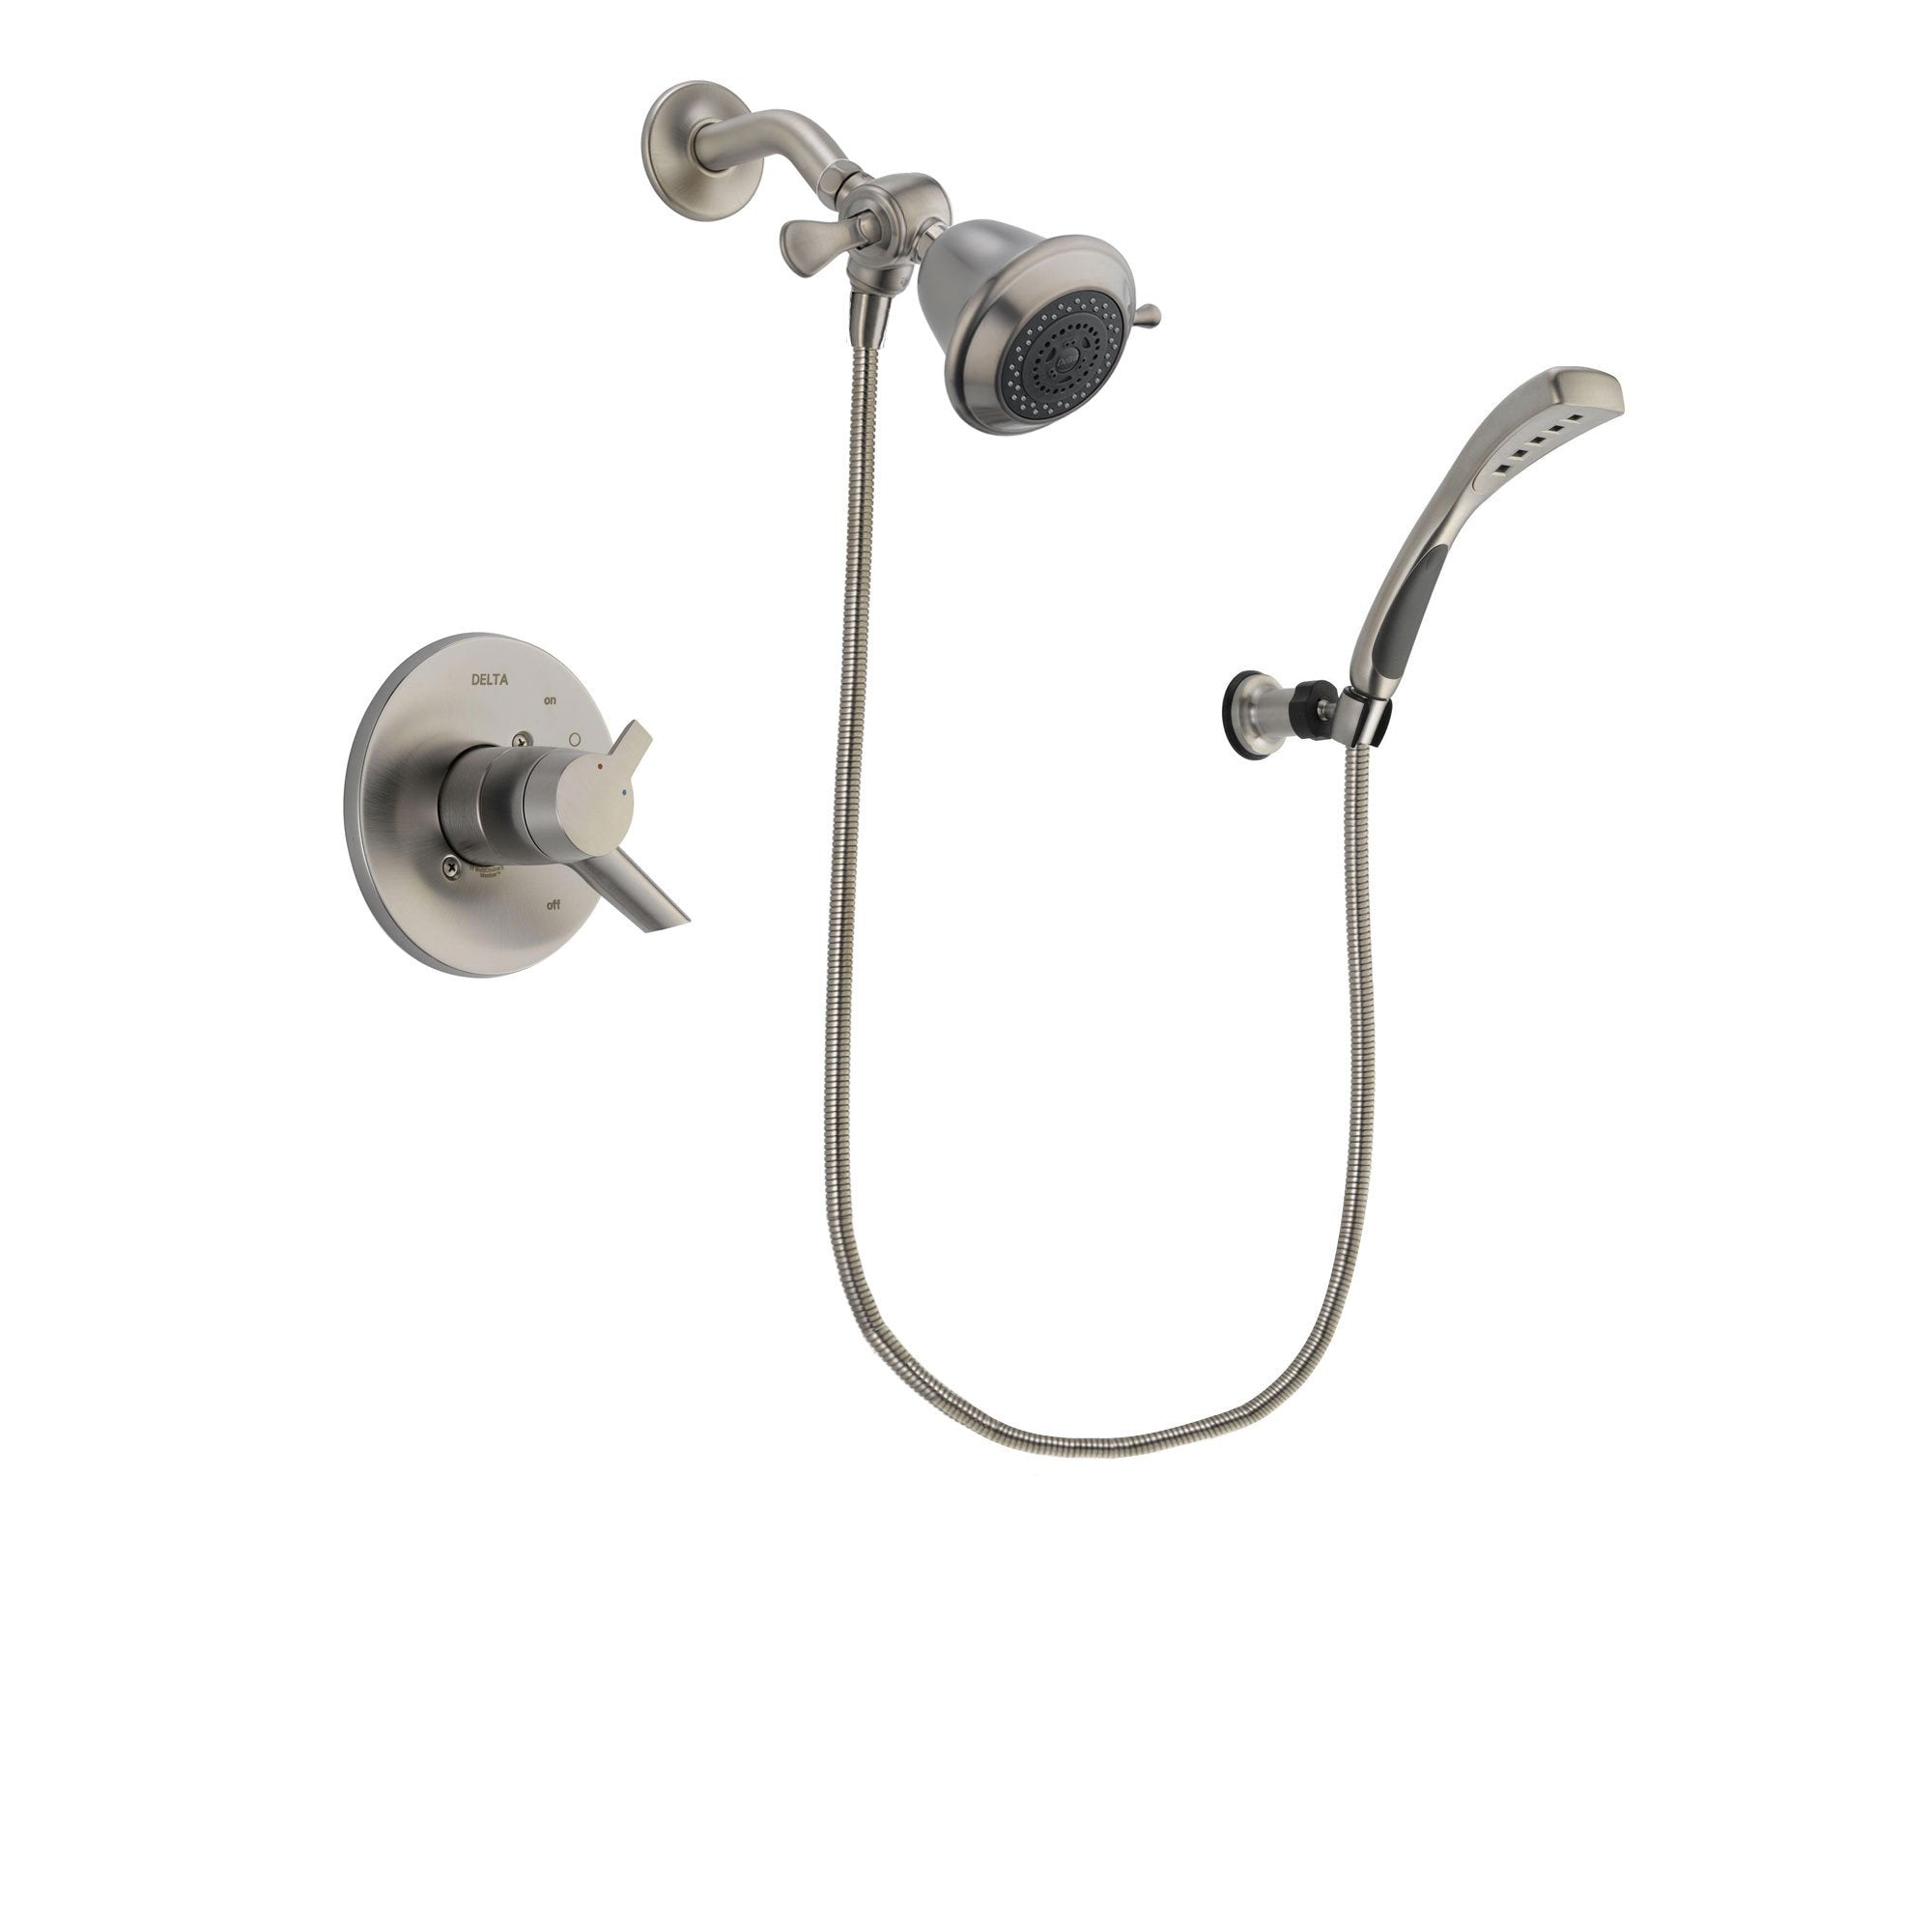 Delta Compel Stainless Steel Finish Dual Control Shower Faucet System Package with Shower Head and Wall Mounted Handshower Includes Rough-in Valve DSP1810V